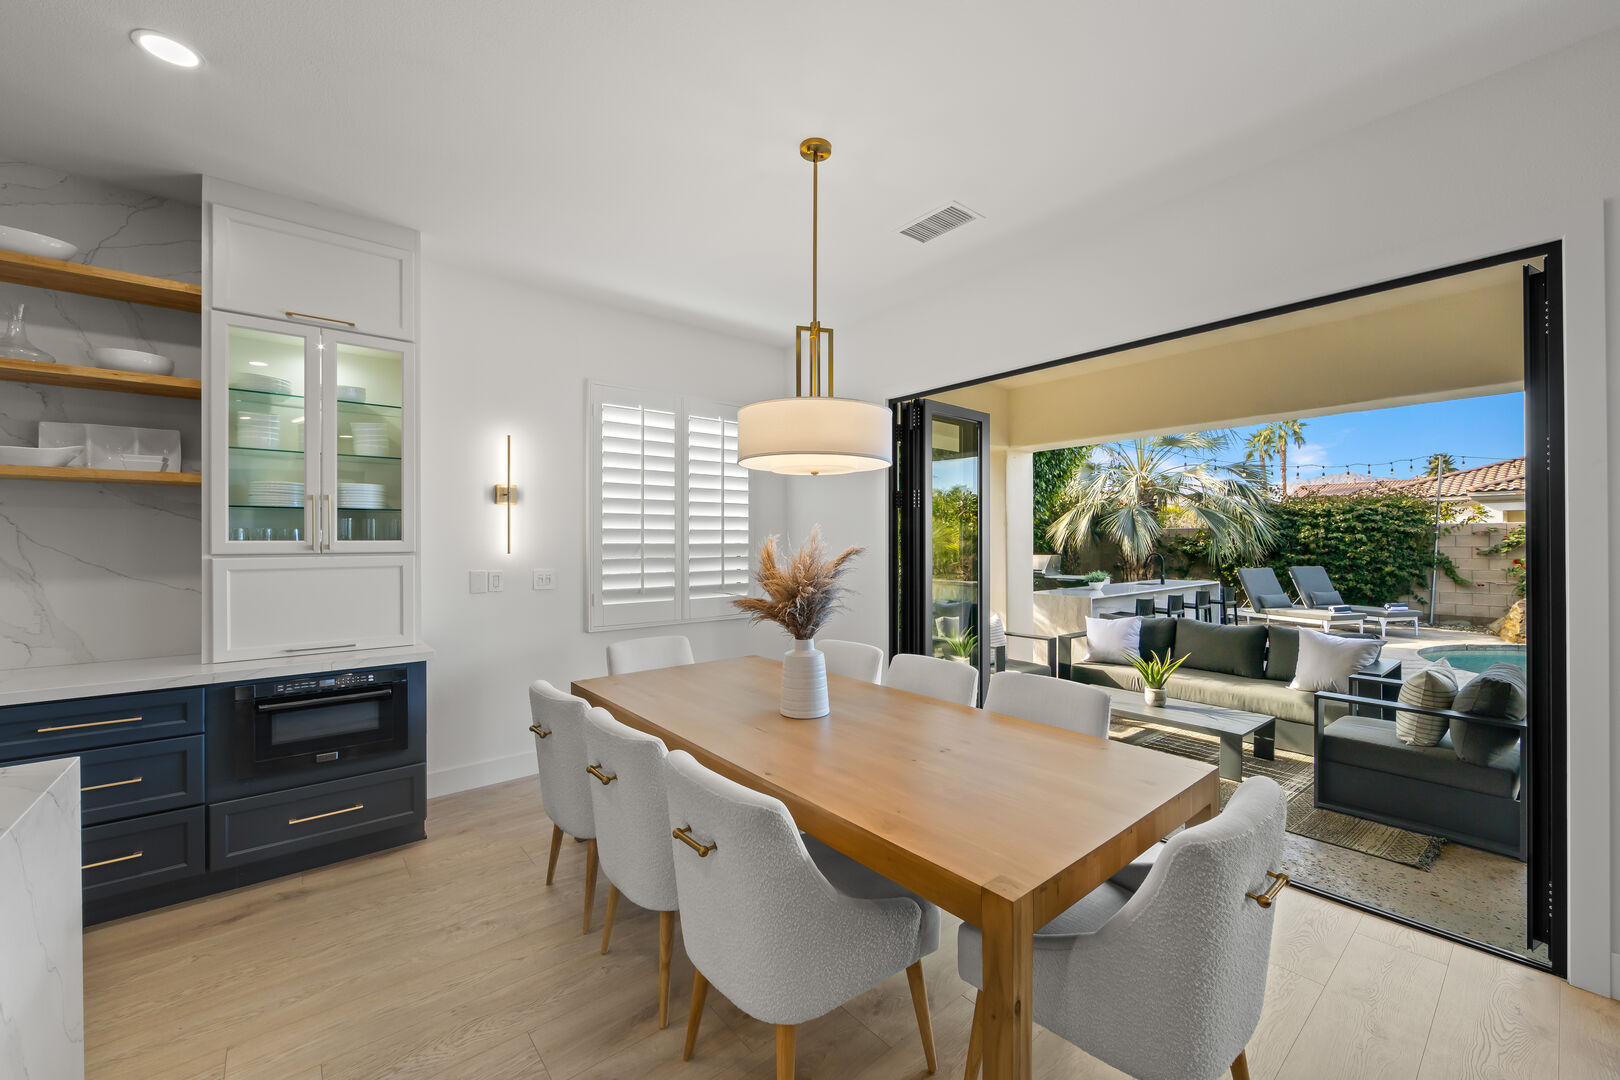 Move seamlessly into the dining area, where a formal dining table with seating for 8 awaits.